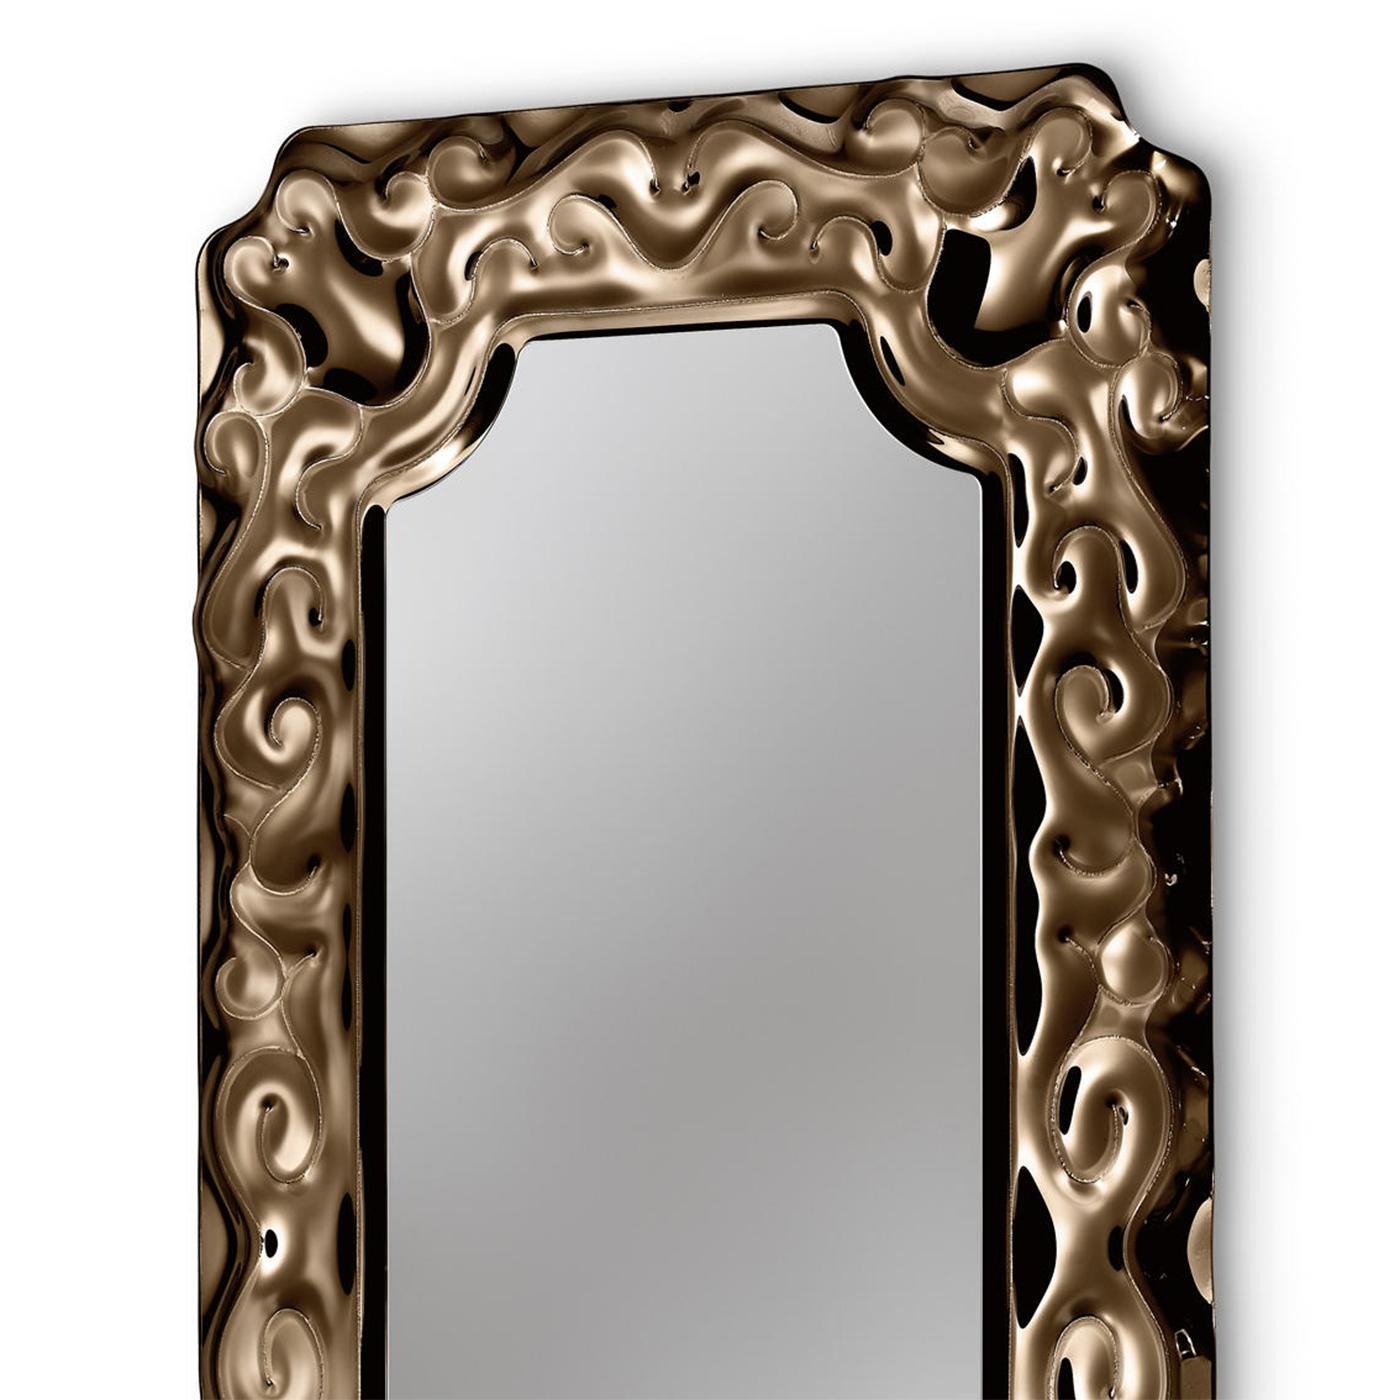 Mirror castle bronze rectangular in fused glass 6mm
thickness with back-silvered frame. With flat mirror in
bronze finish 5mm thickness.